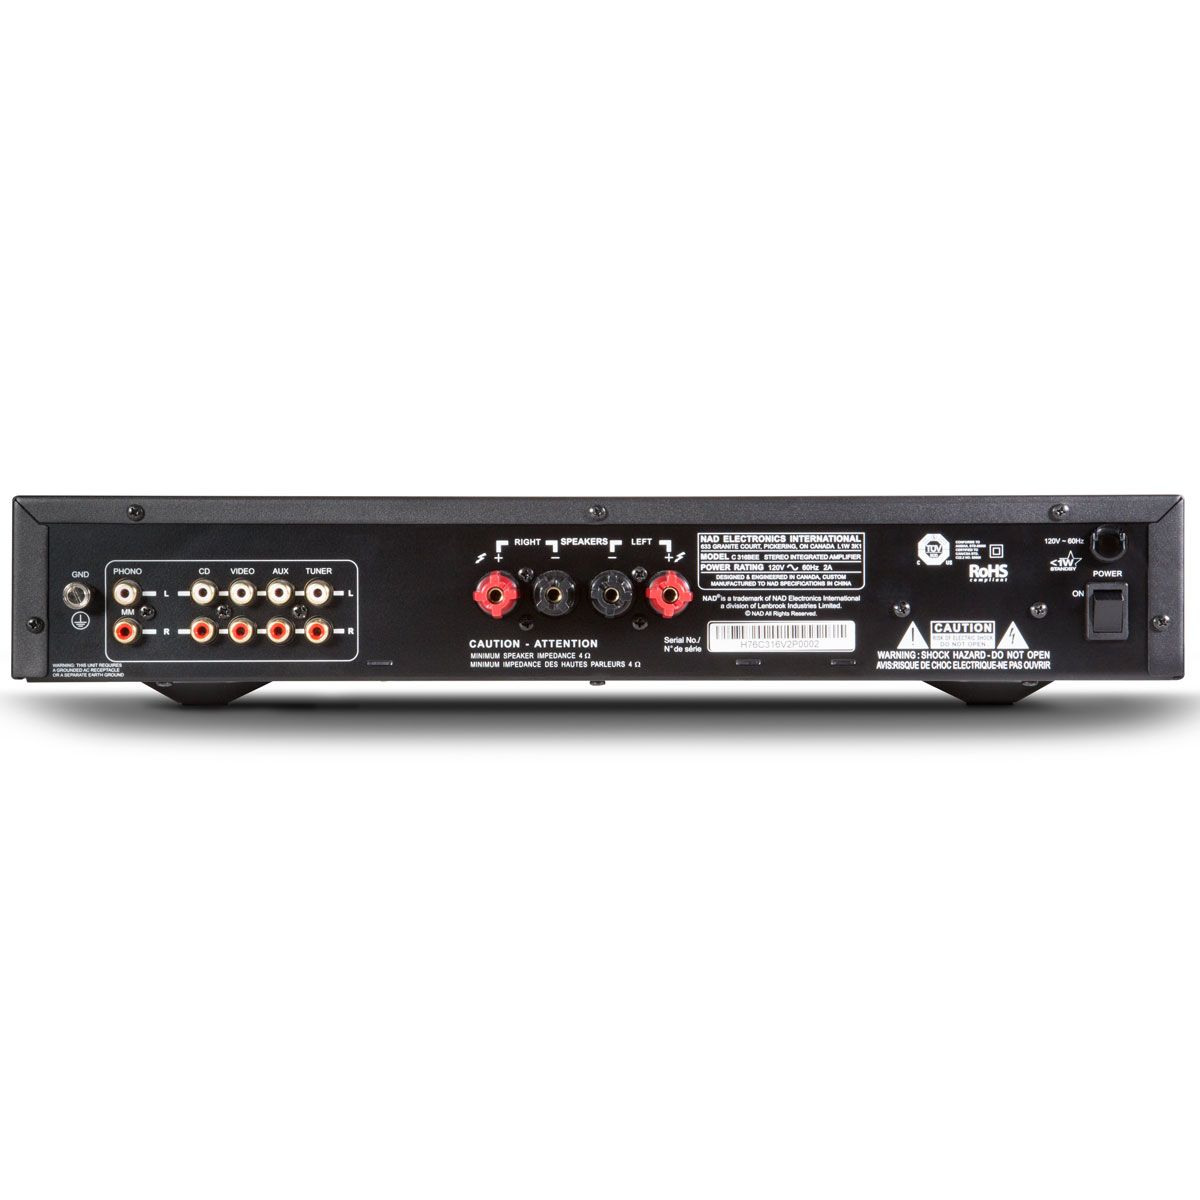 NAD C316BEEV2 Integrated Amplifier, Back